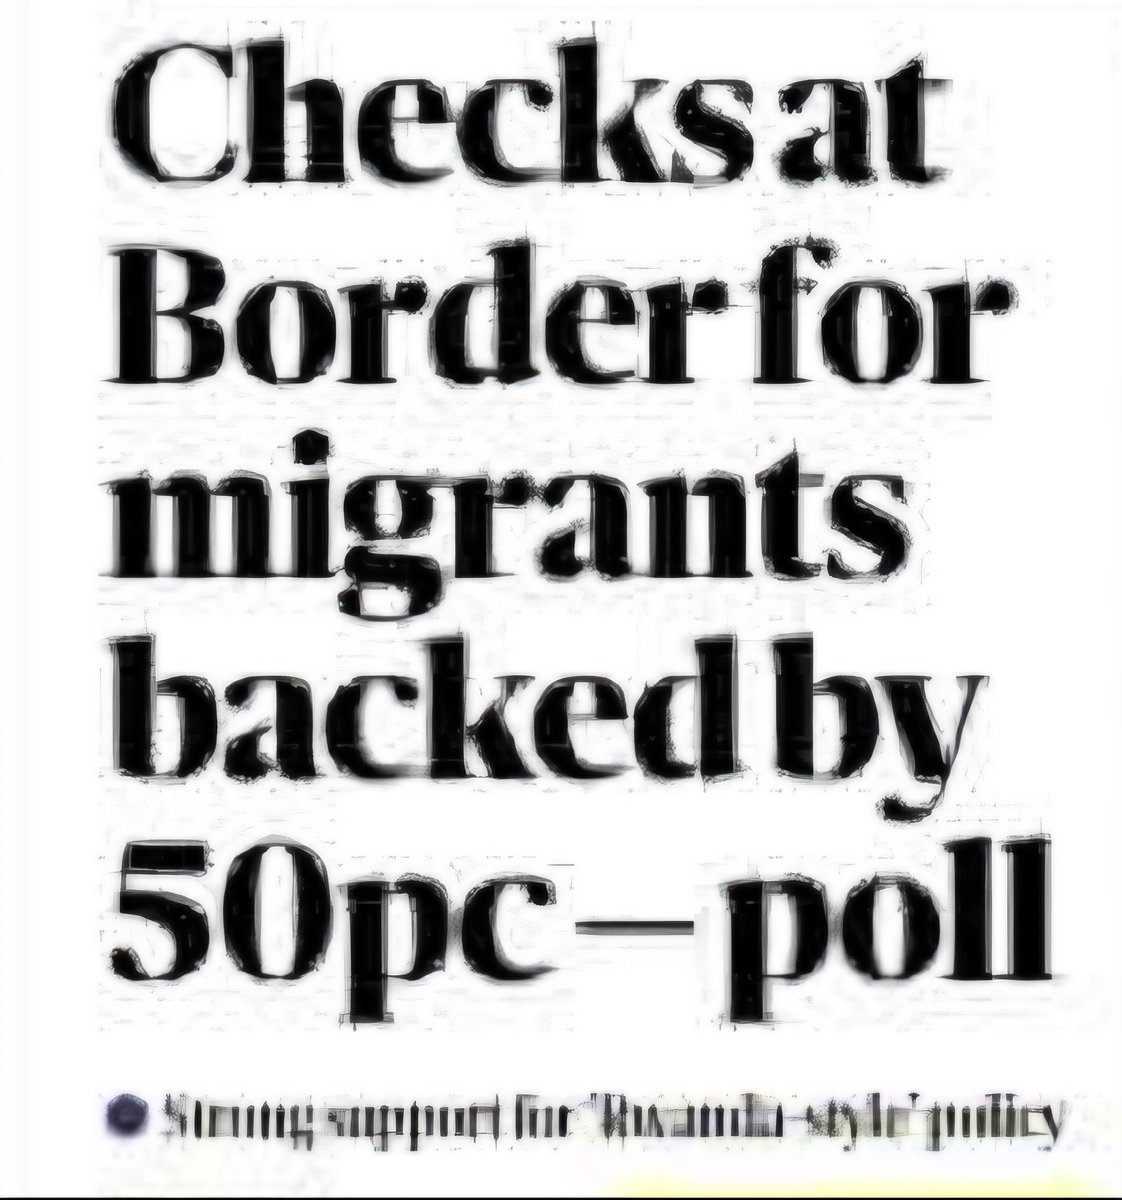 🚨 BREAKING 🚨

The front page of the Sunday Independent. 

Polling shows strong support for Rwanda style policy.